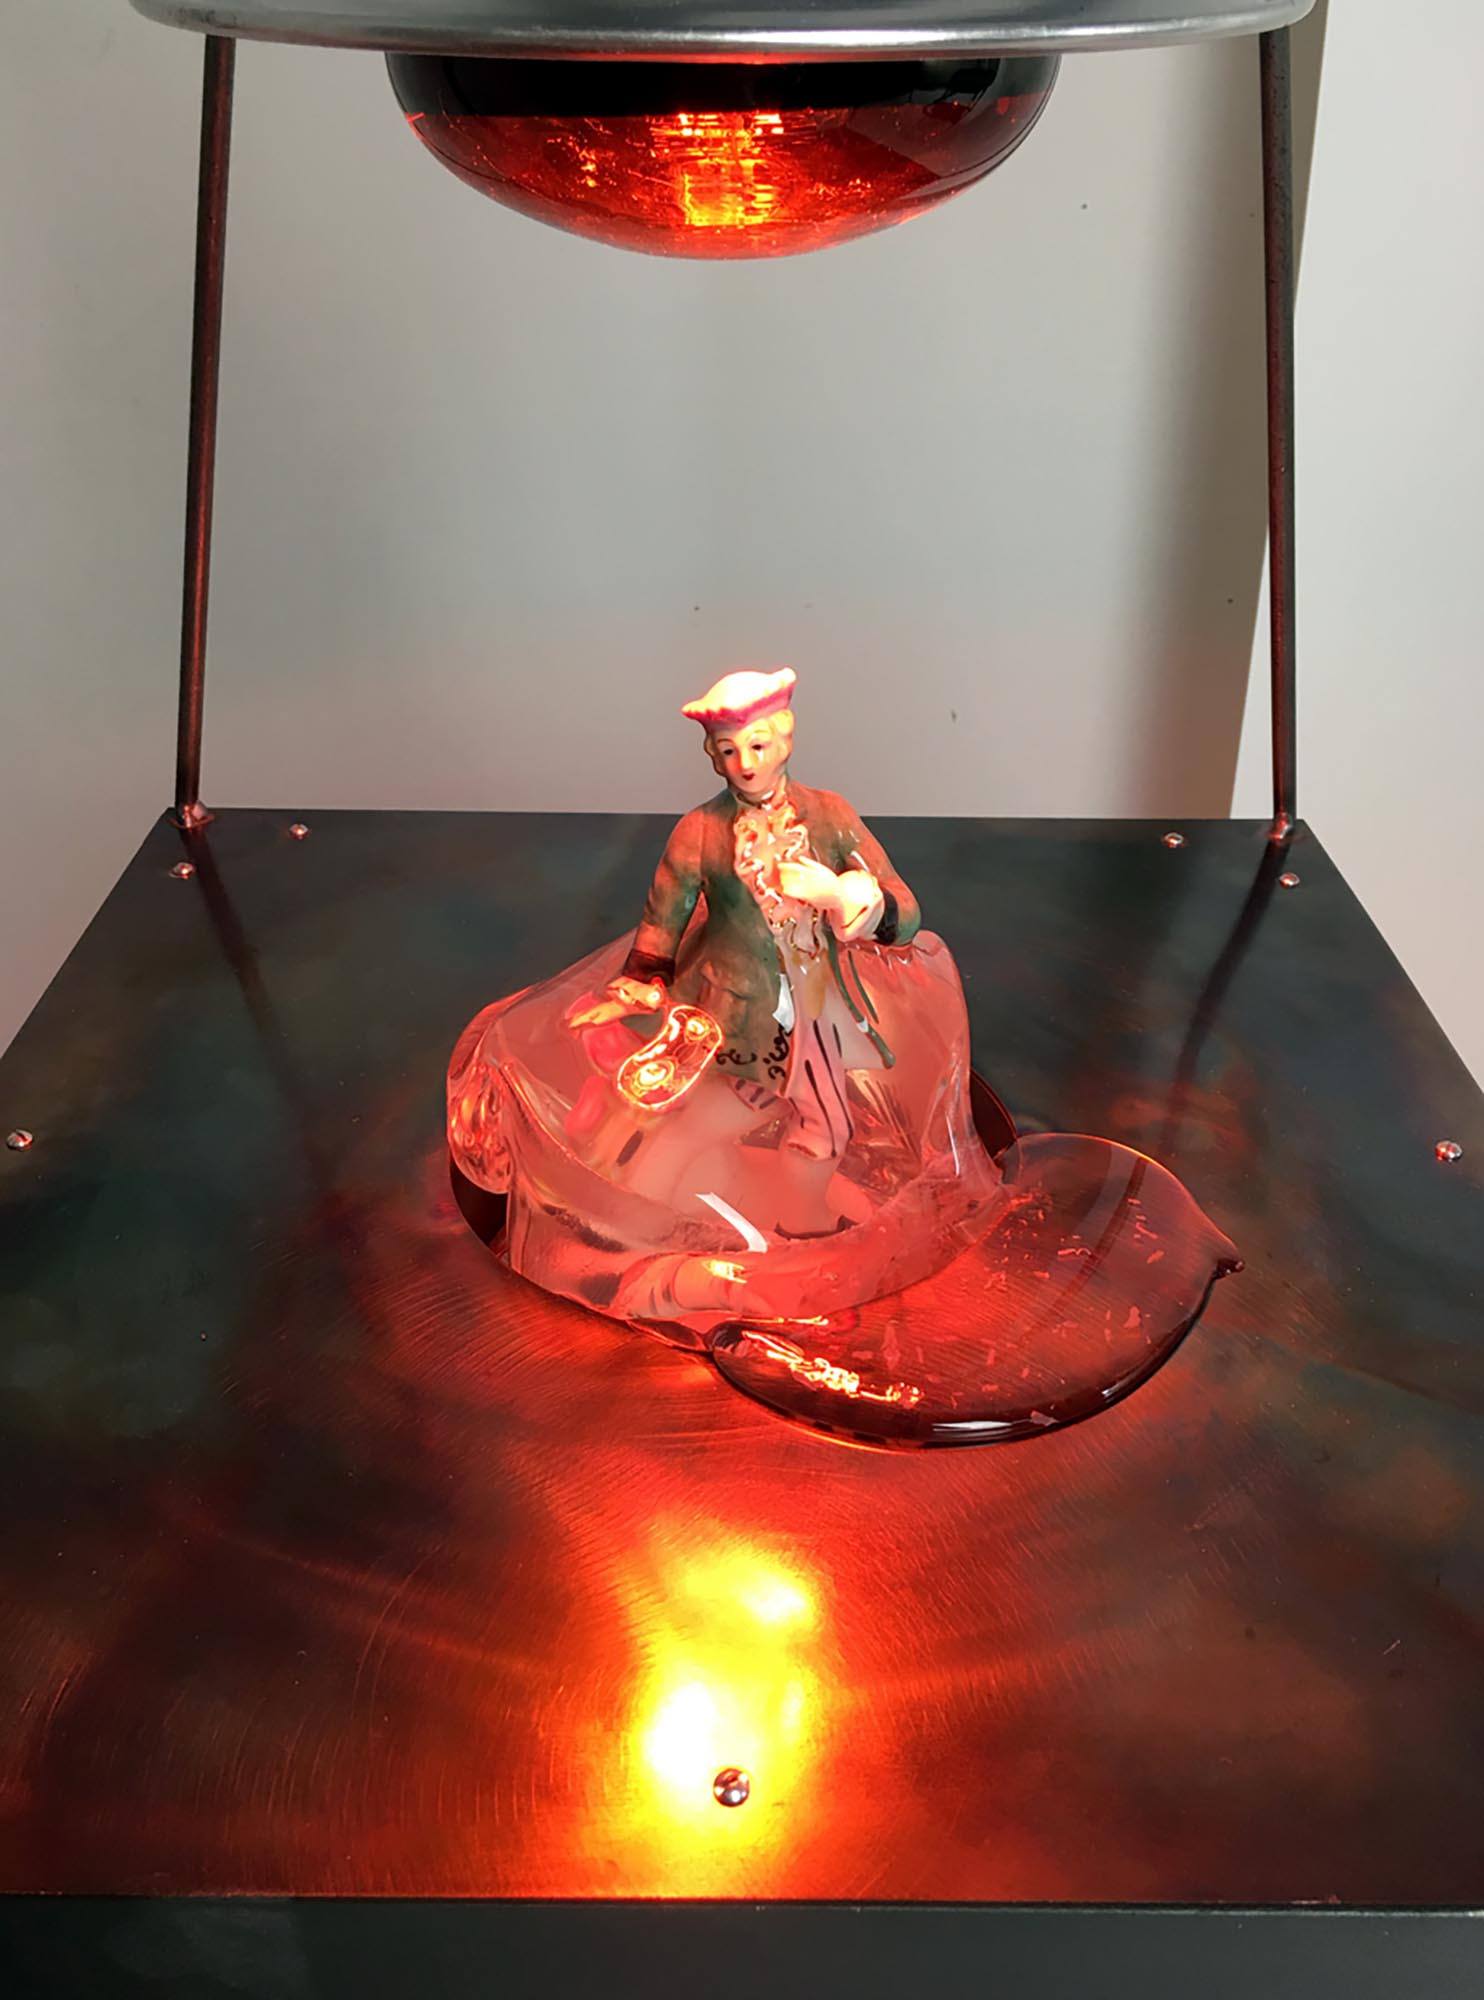 A melting doll of a woman under a red lamp